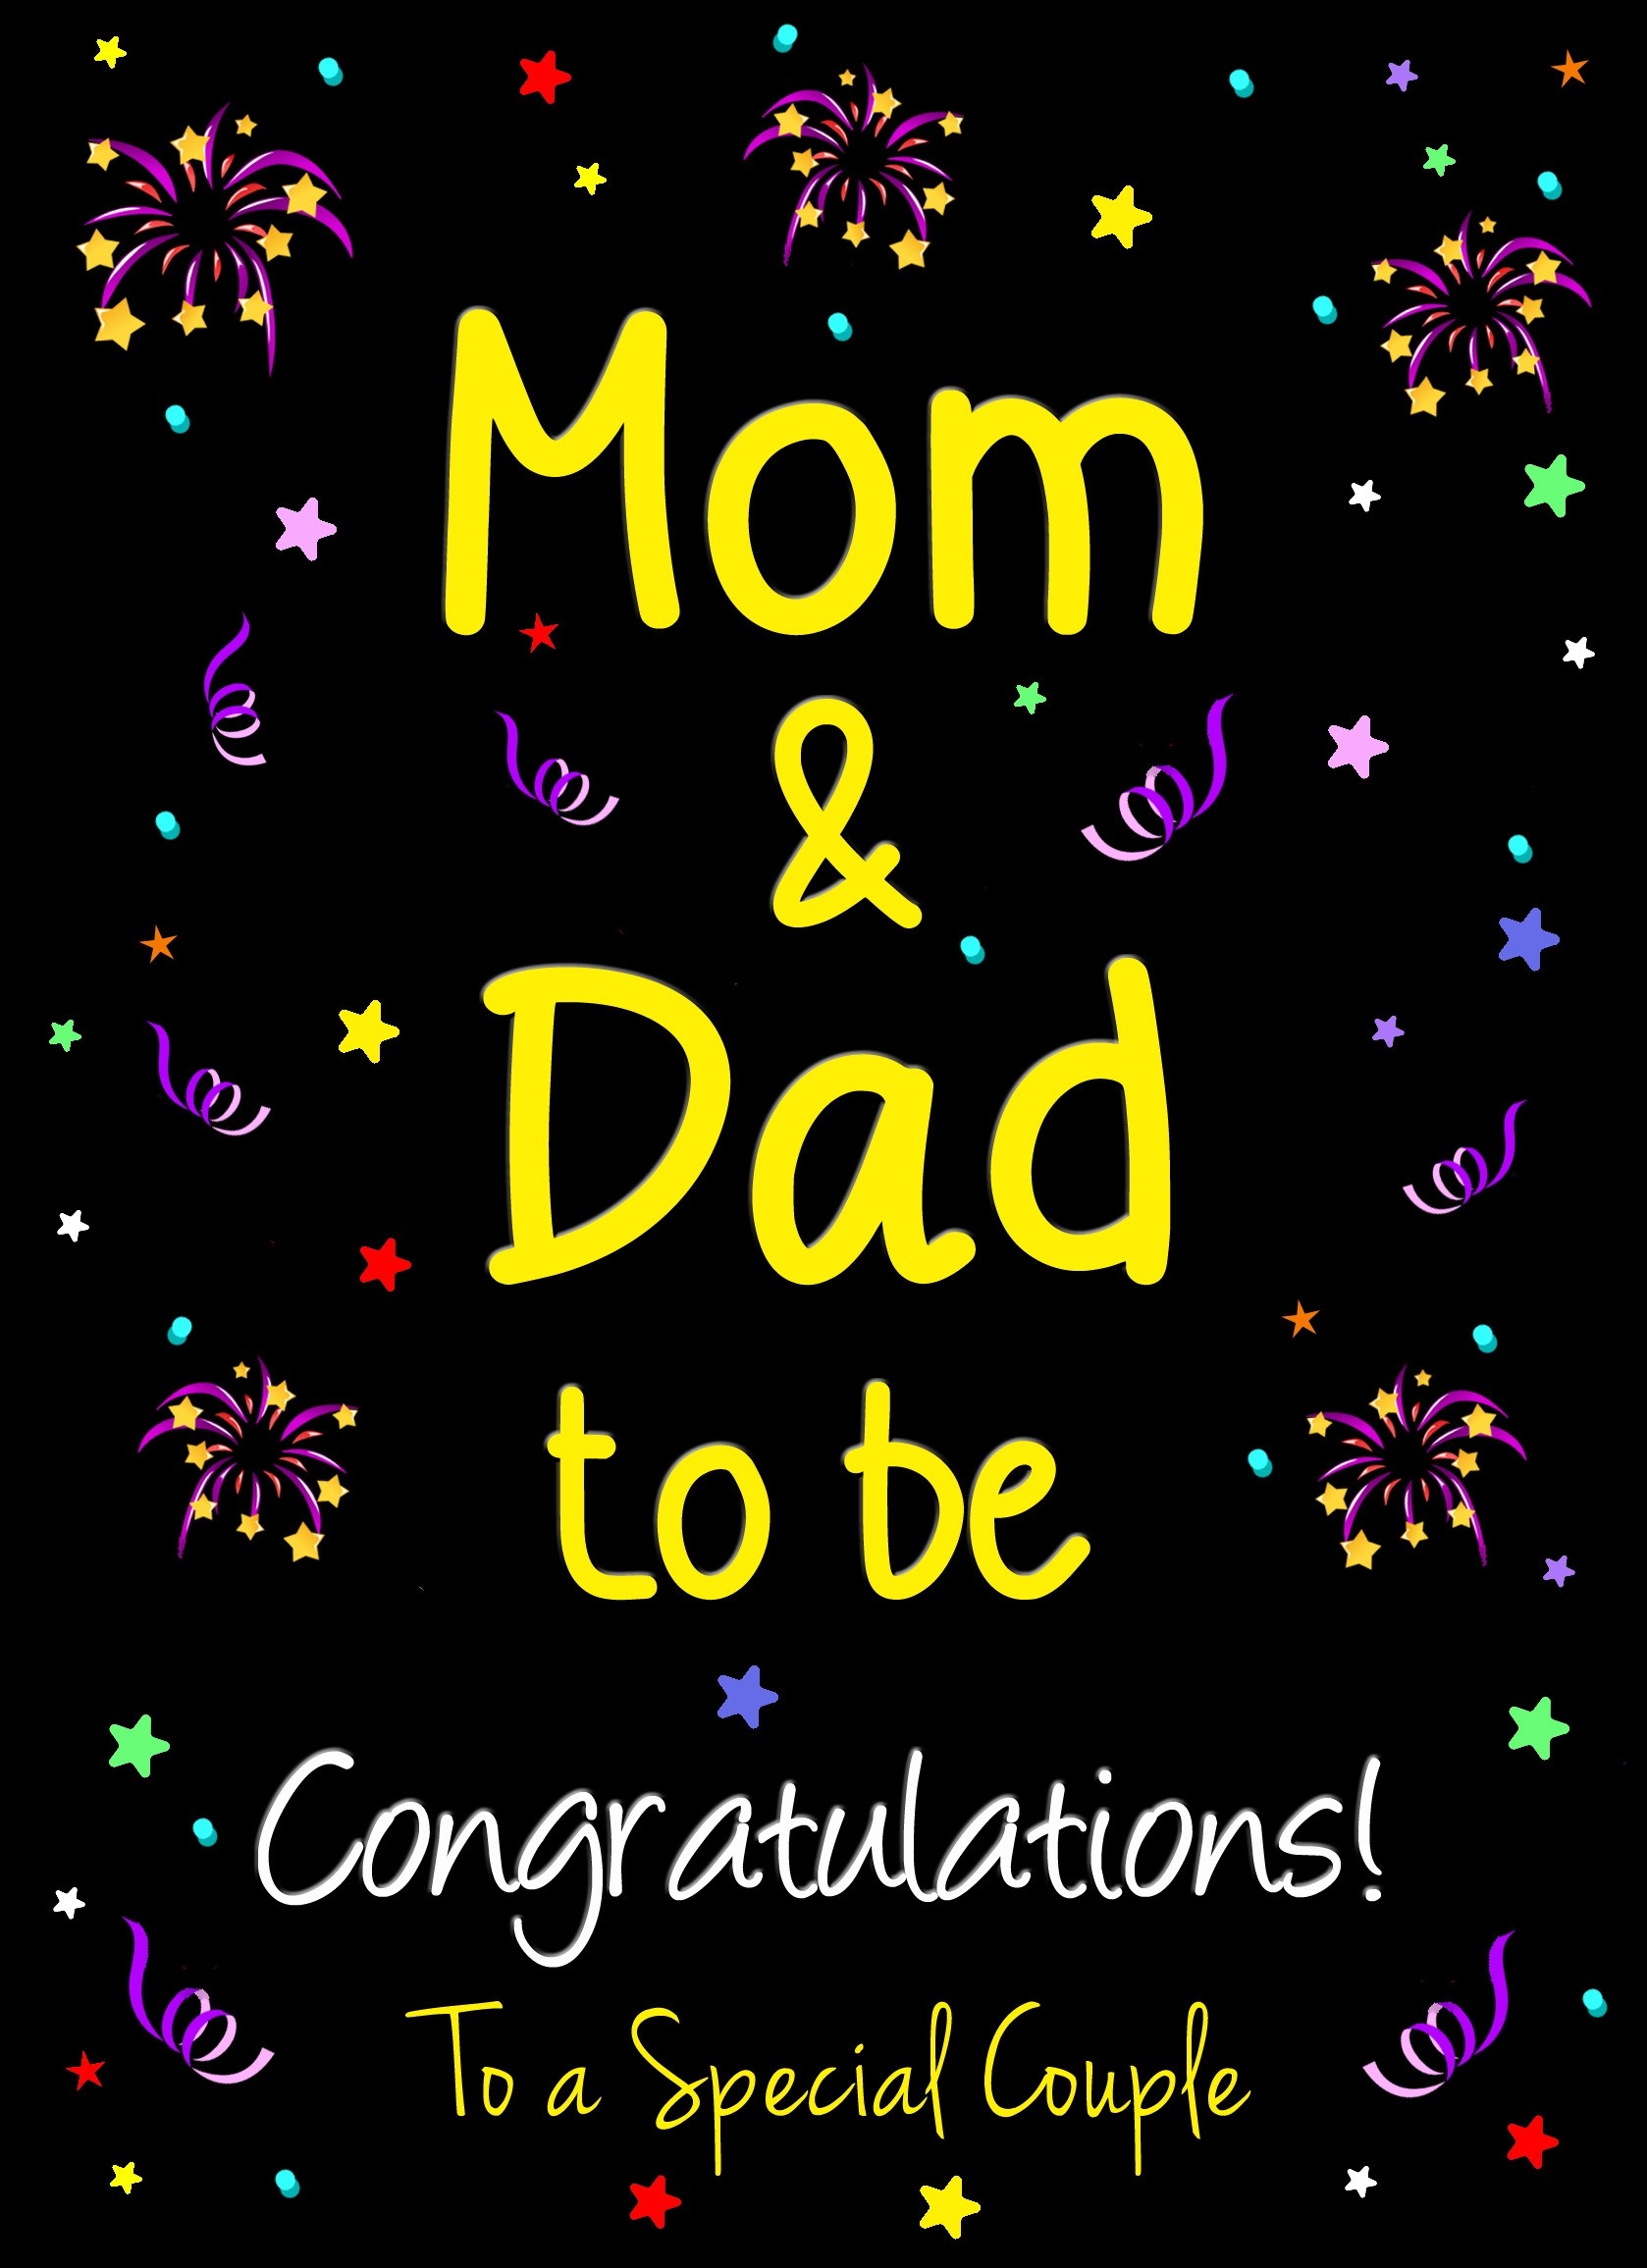 Mom and Dad to be Baby Pregnancy Congratulations Card 